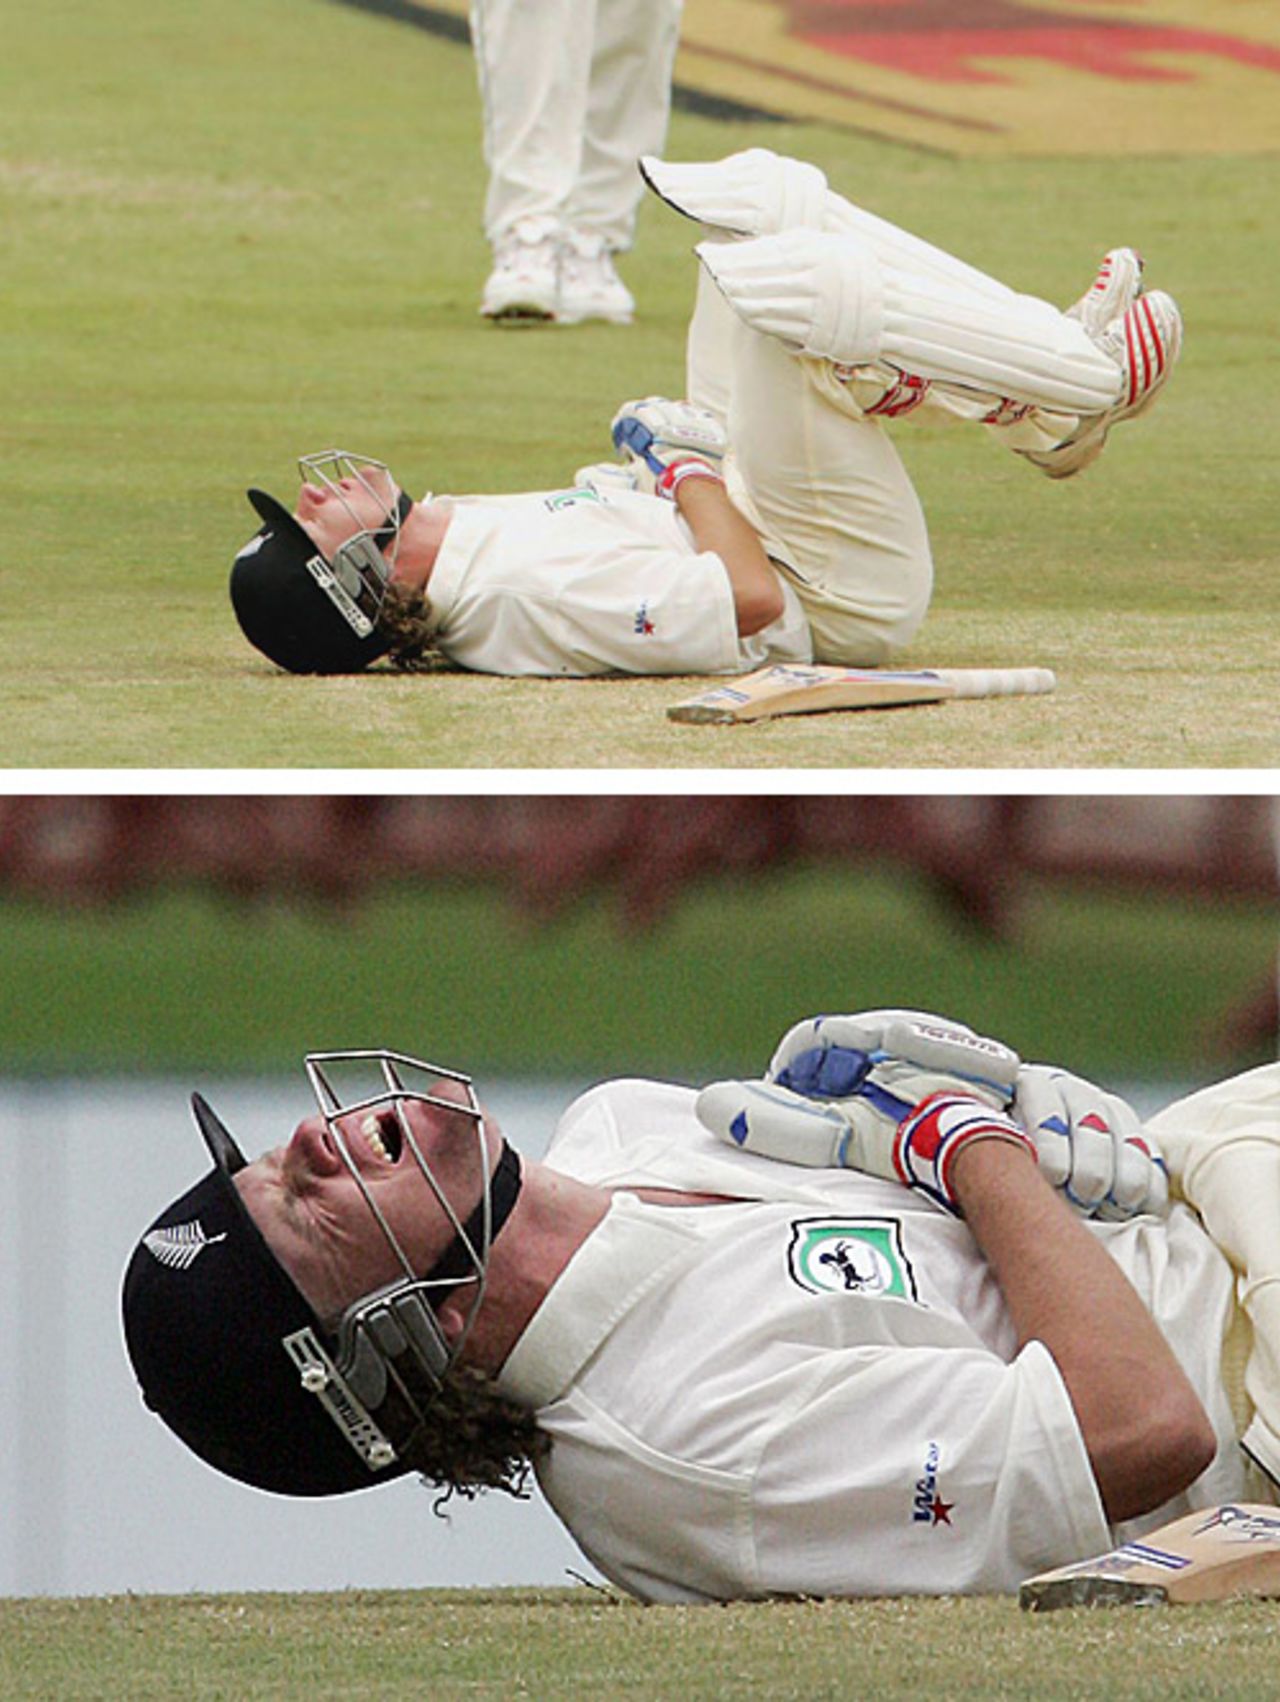 Hamish Marshall is struck a fearful blow in his chest, South Africa v New Zealand, 1st Test, Centurion Park, April 18, 2006